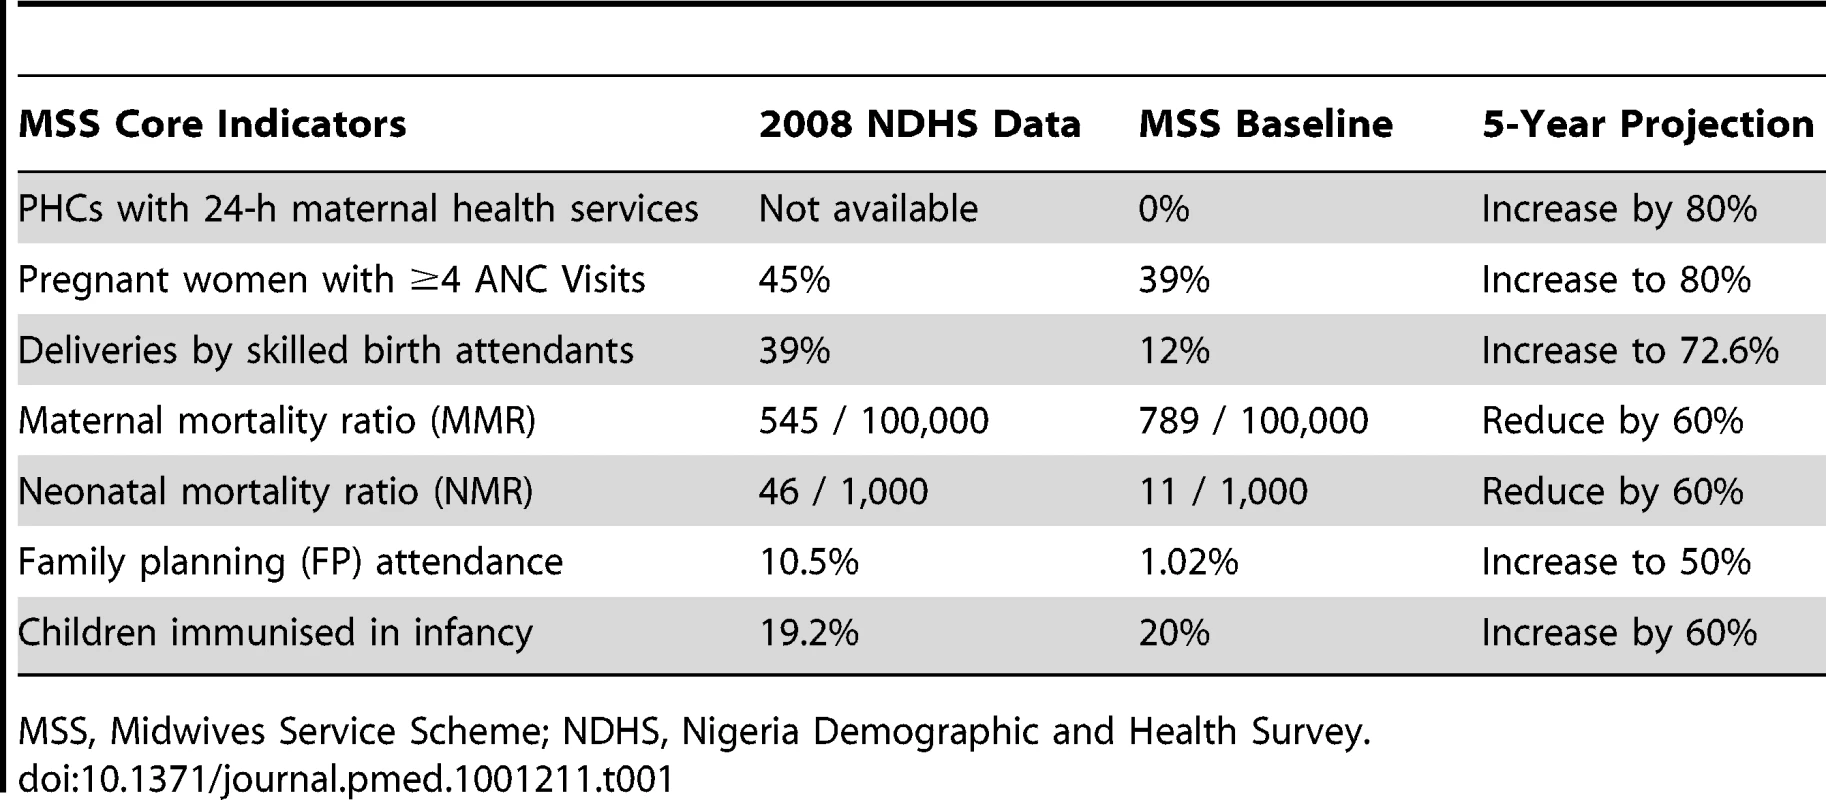 MSS core indicators and projected outcome, with data comparing 2008 NDHS with MSS facility baseline data.